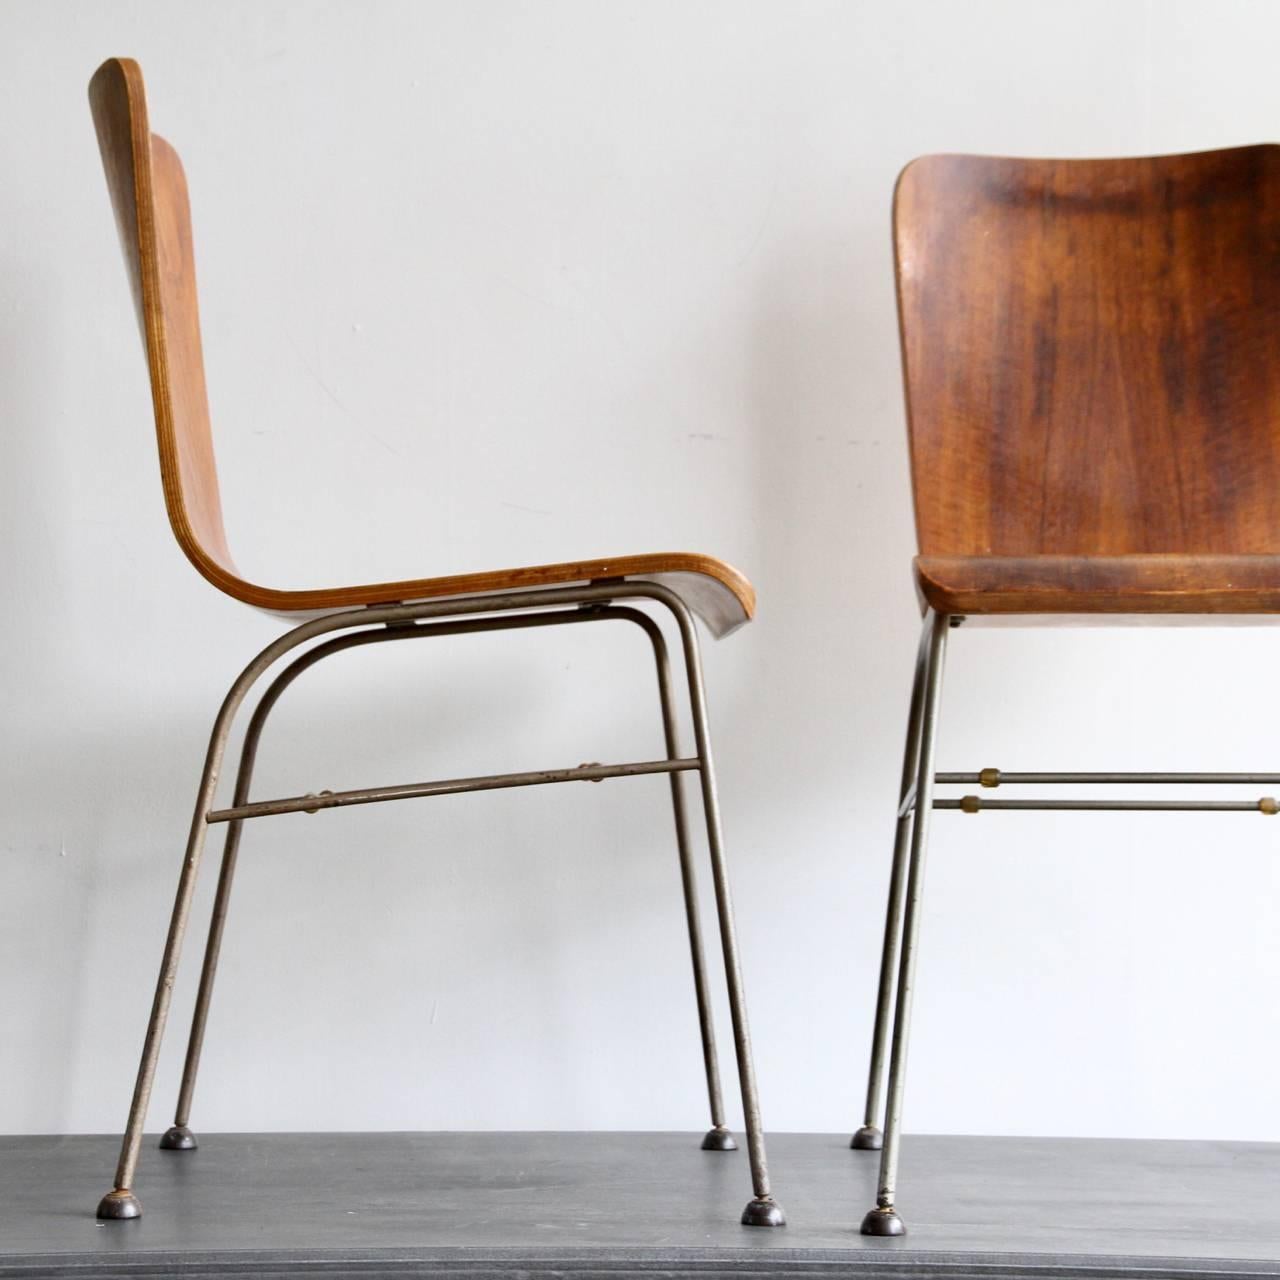 A pair of 1950s wire frames bent laminate walnut chairs on Armstrong Cork Co Bakelite feet. In the style of Olavi Kettunen. 
One of the chairs is missing a foot see photos. A replacement could be made.